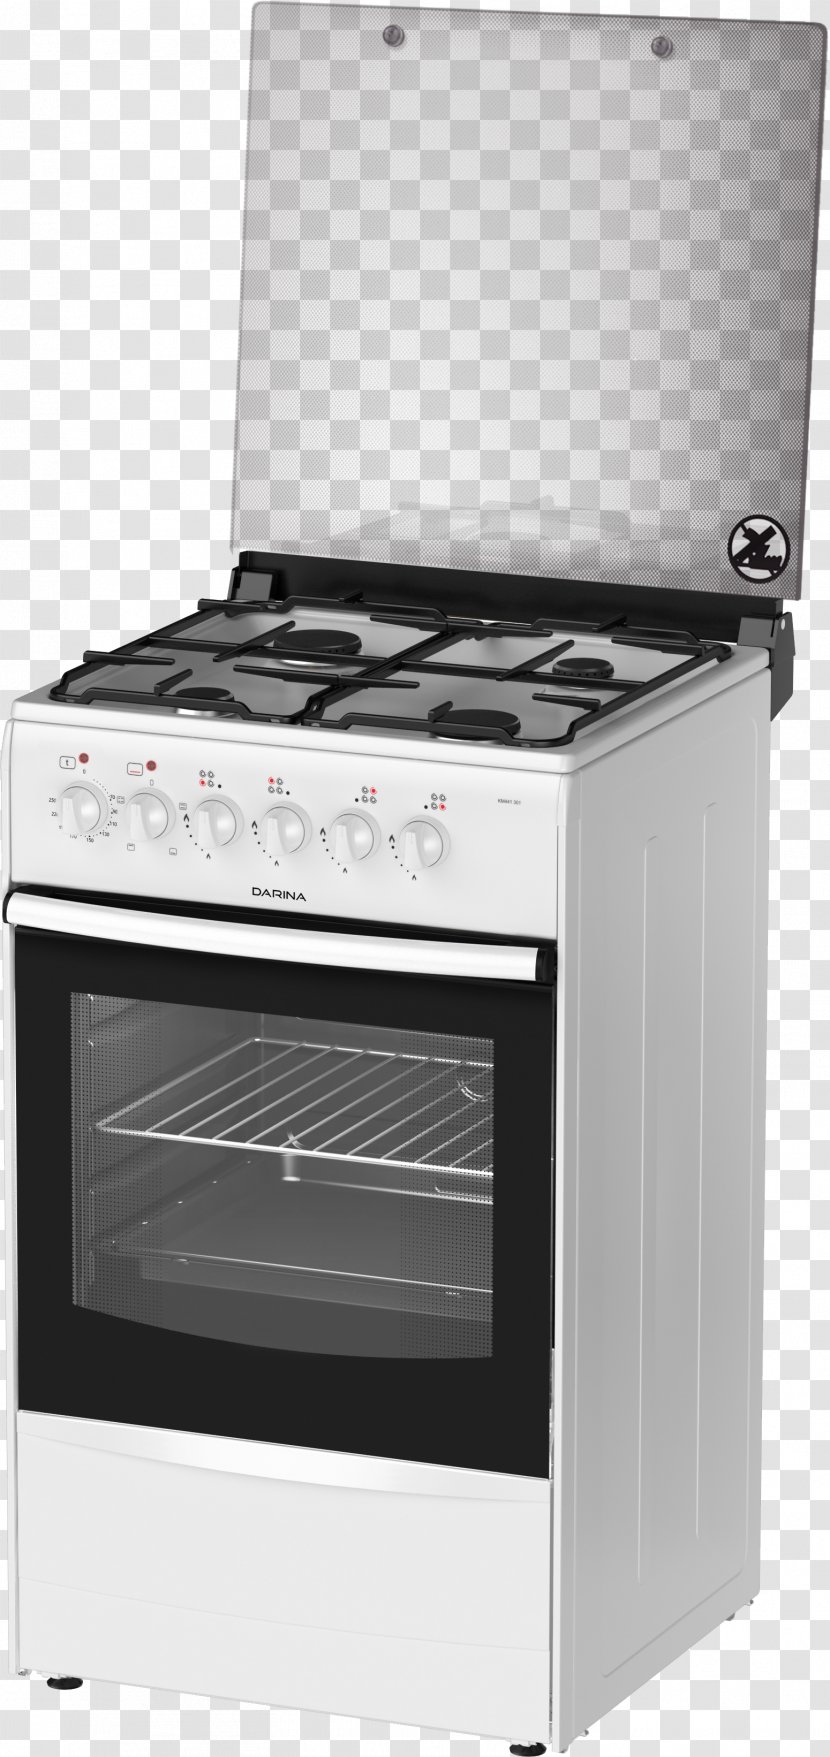 Gas Stove Cooking Ranges Hob Брестгазоаппарат - Oven Transparent PNG